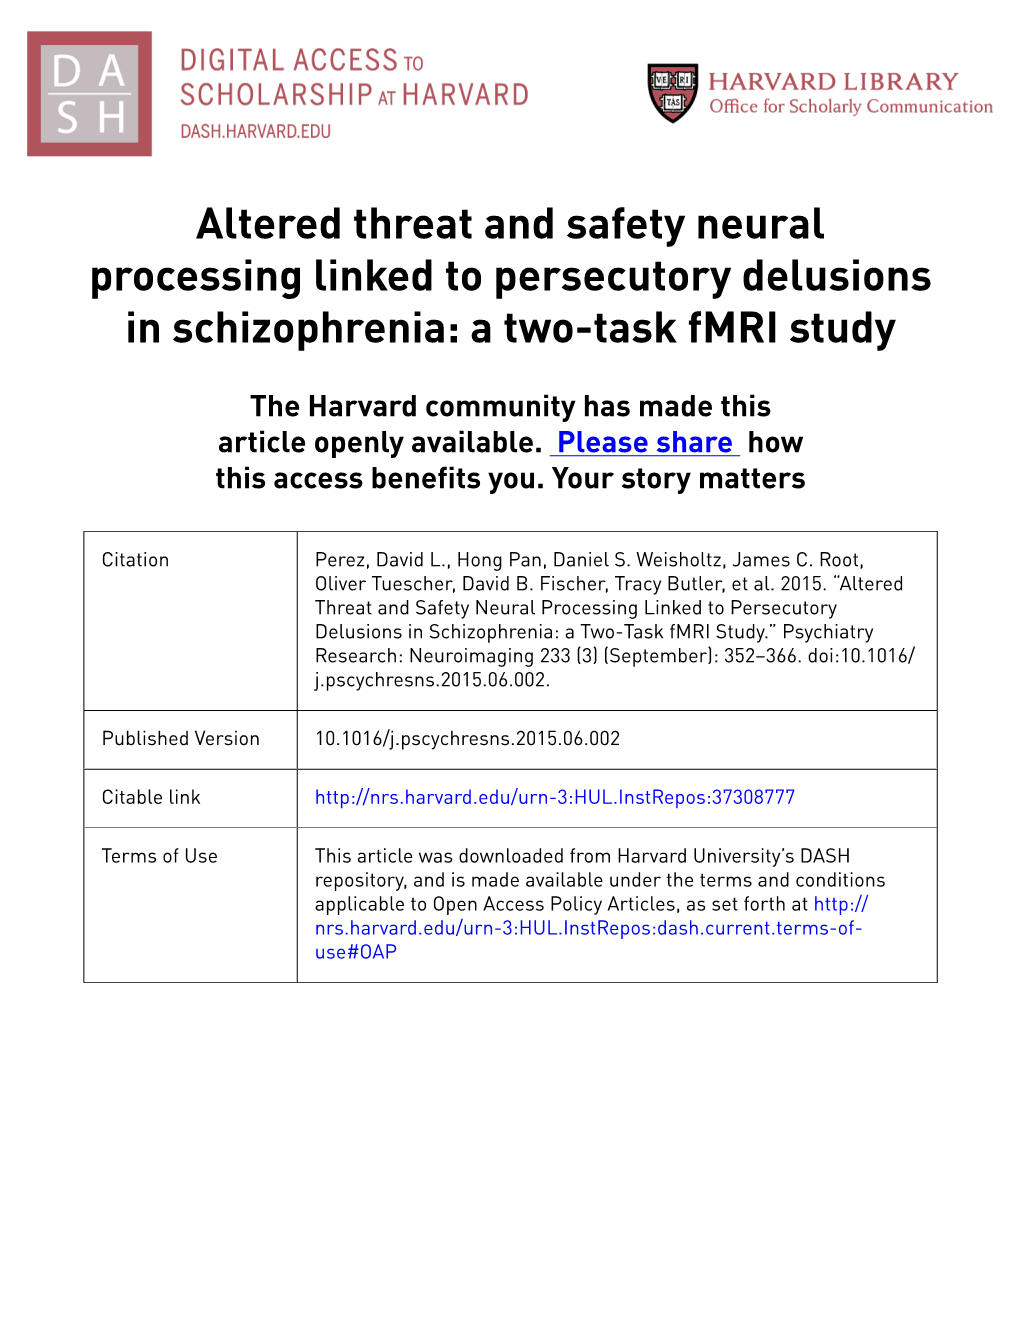 Altered Threat and Safety Neural Processing Linked to Persecutory Delusions in Schizophrenia: a Two-Task Fmri Study